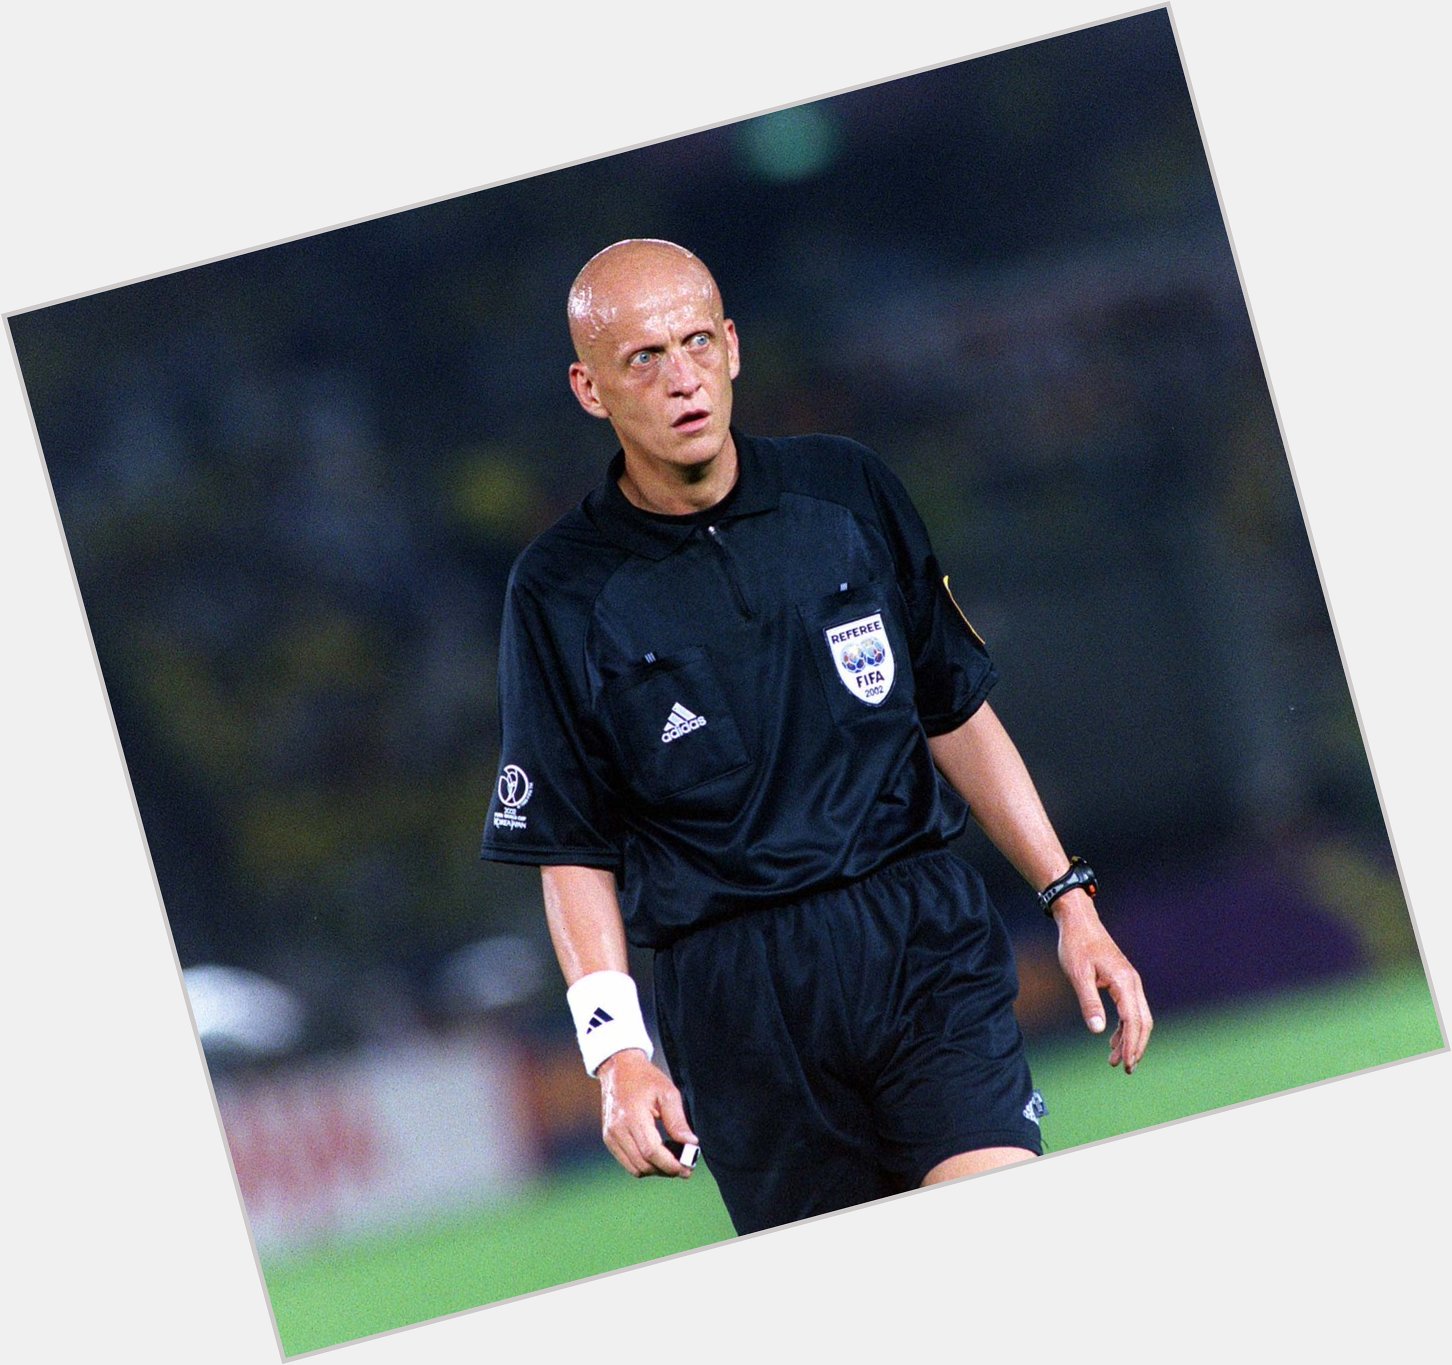  Happy Birthday to the Scariest Man In Football and GOAT referee, Pierluigi Collina! 